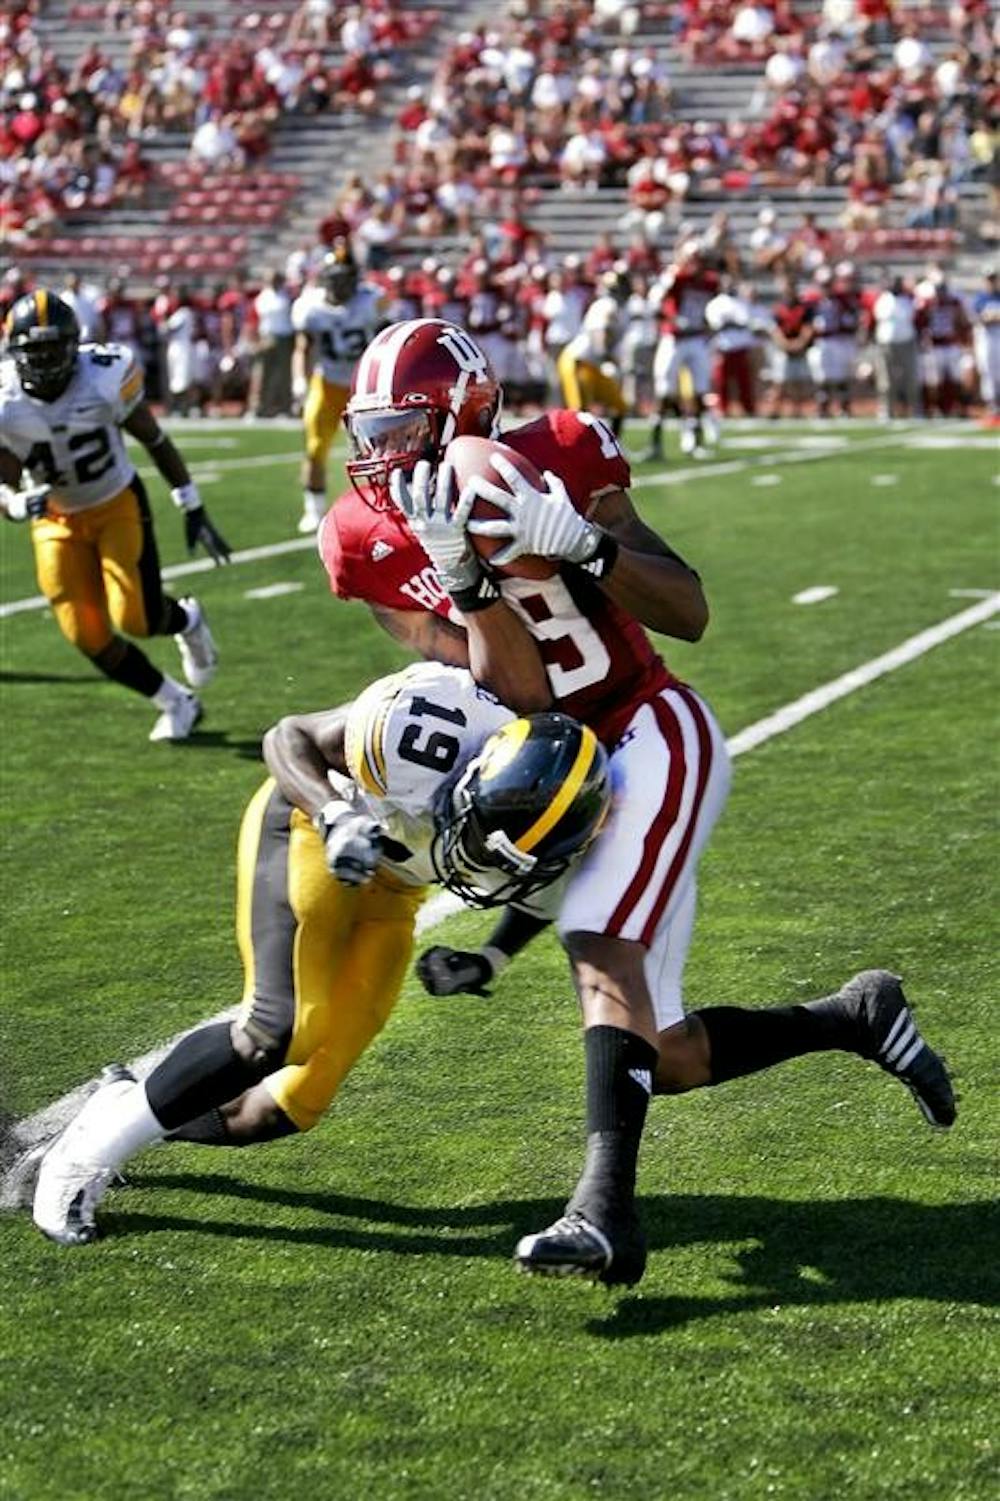 Senior wide receiver Brandon Walker-Roby takes a hit from Iowa defensive back Amari Spievey in front of a thinning Memorial Stadium crowd during the Hoosiers 45-9 loss to Iowa Saturday afternoon at Memorial Stadium.